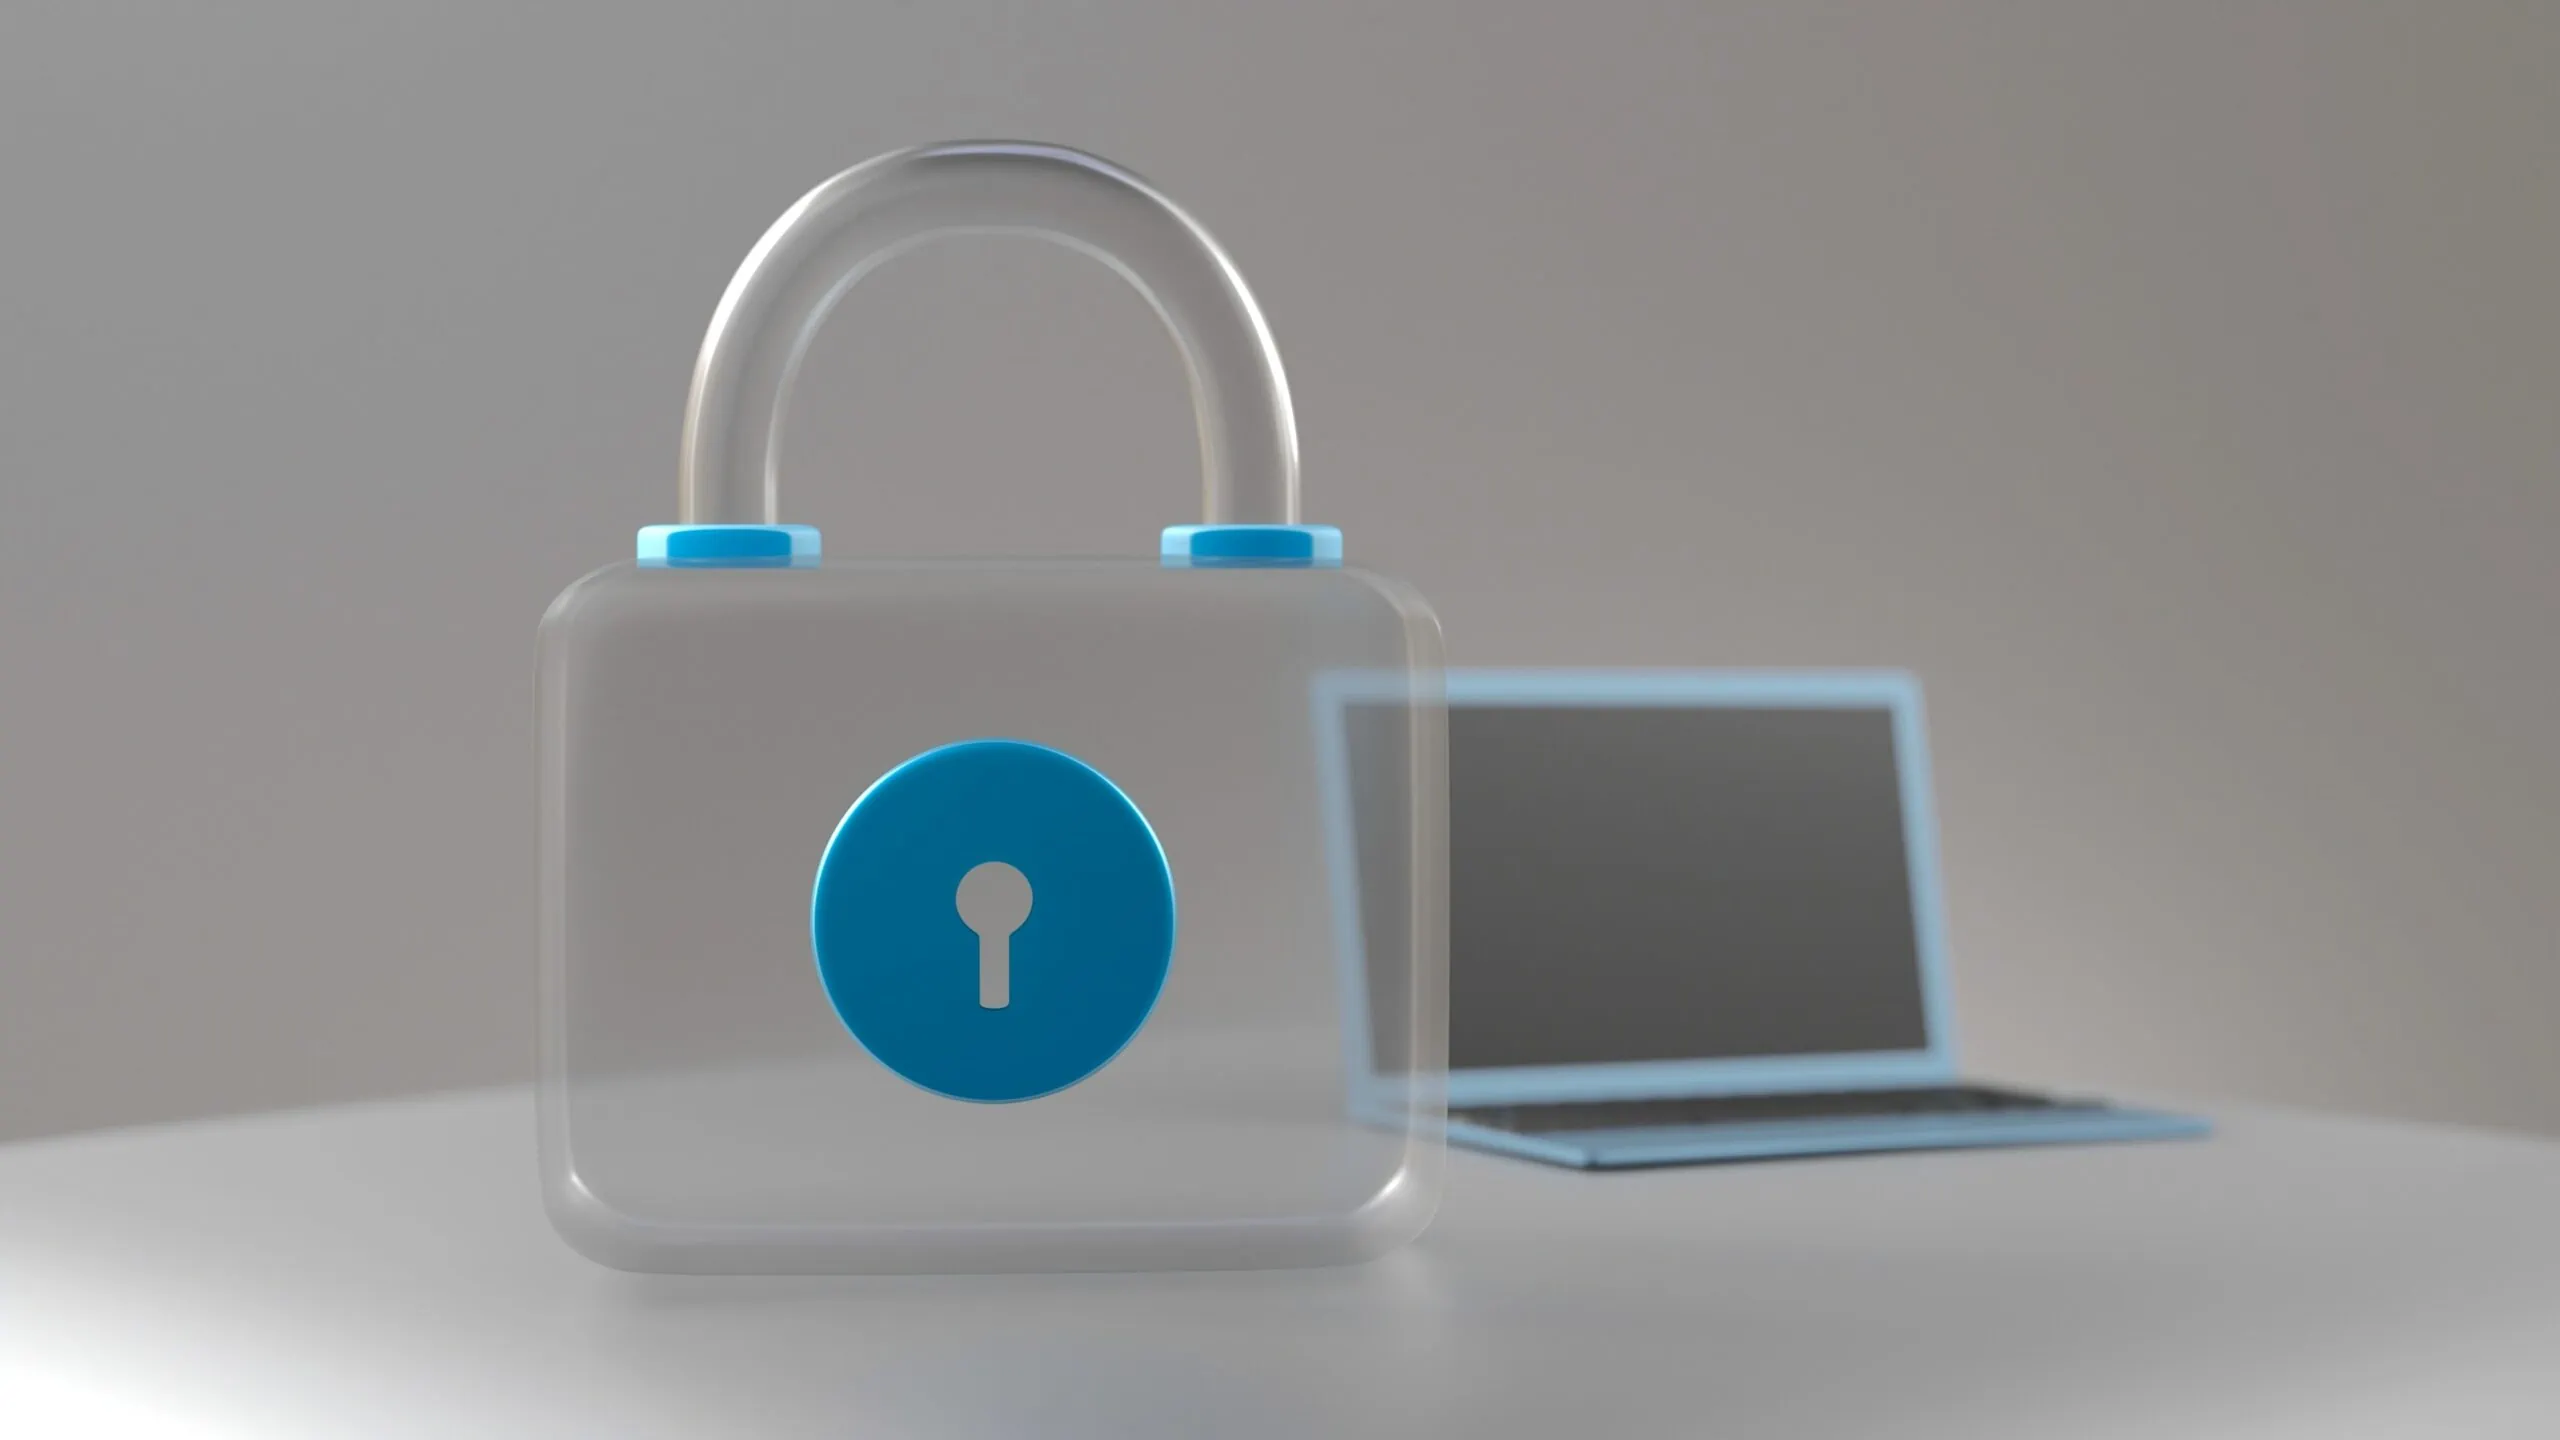 A laptop on a table with a padlock beside it symbolizing the importance of resetting passwords regularly.